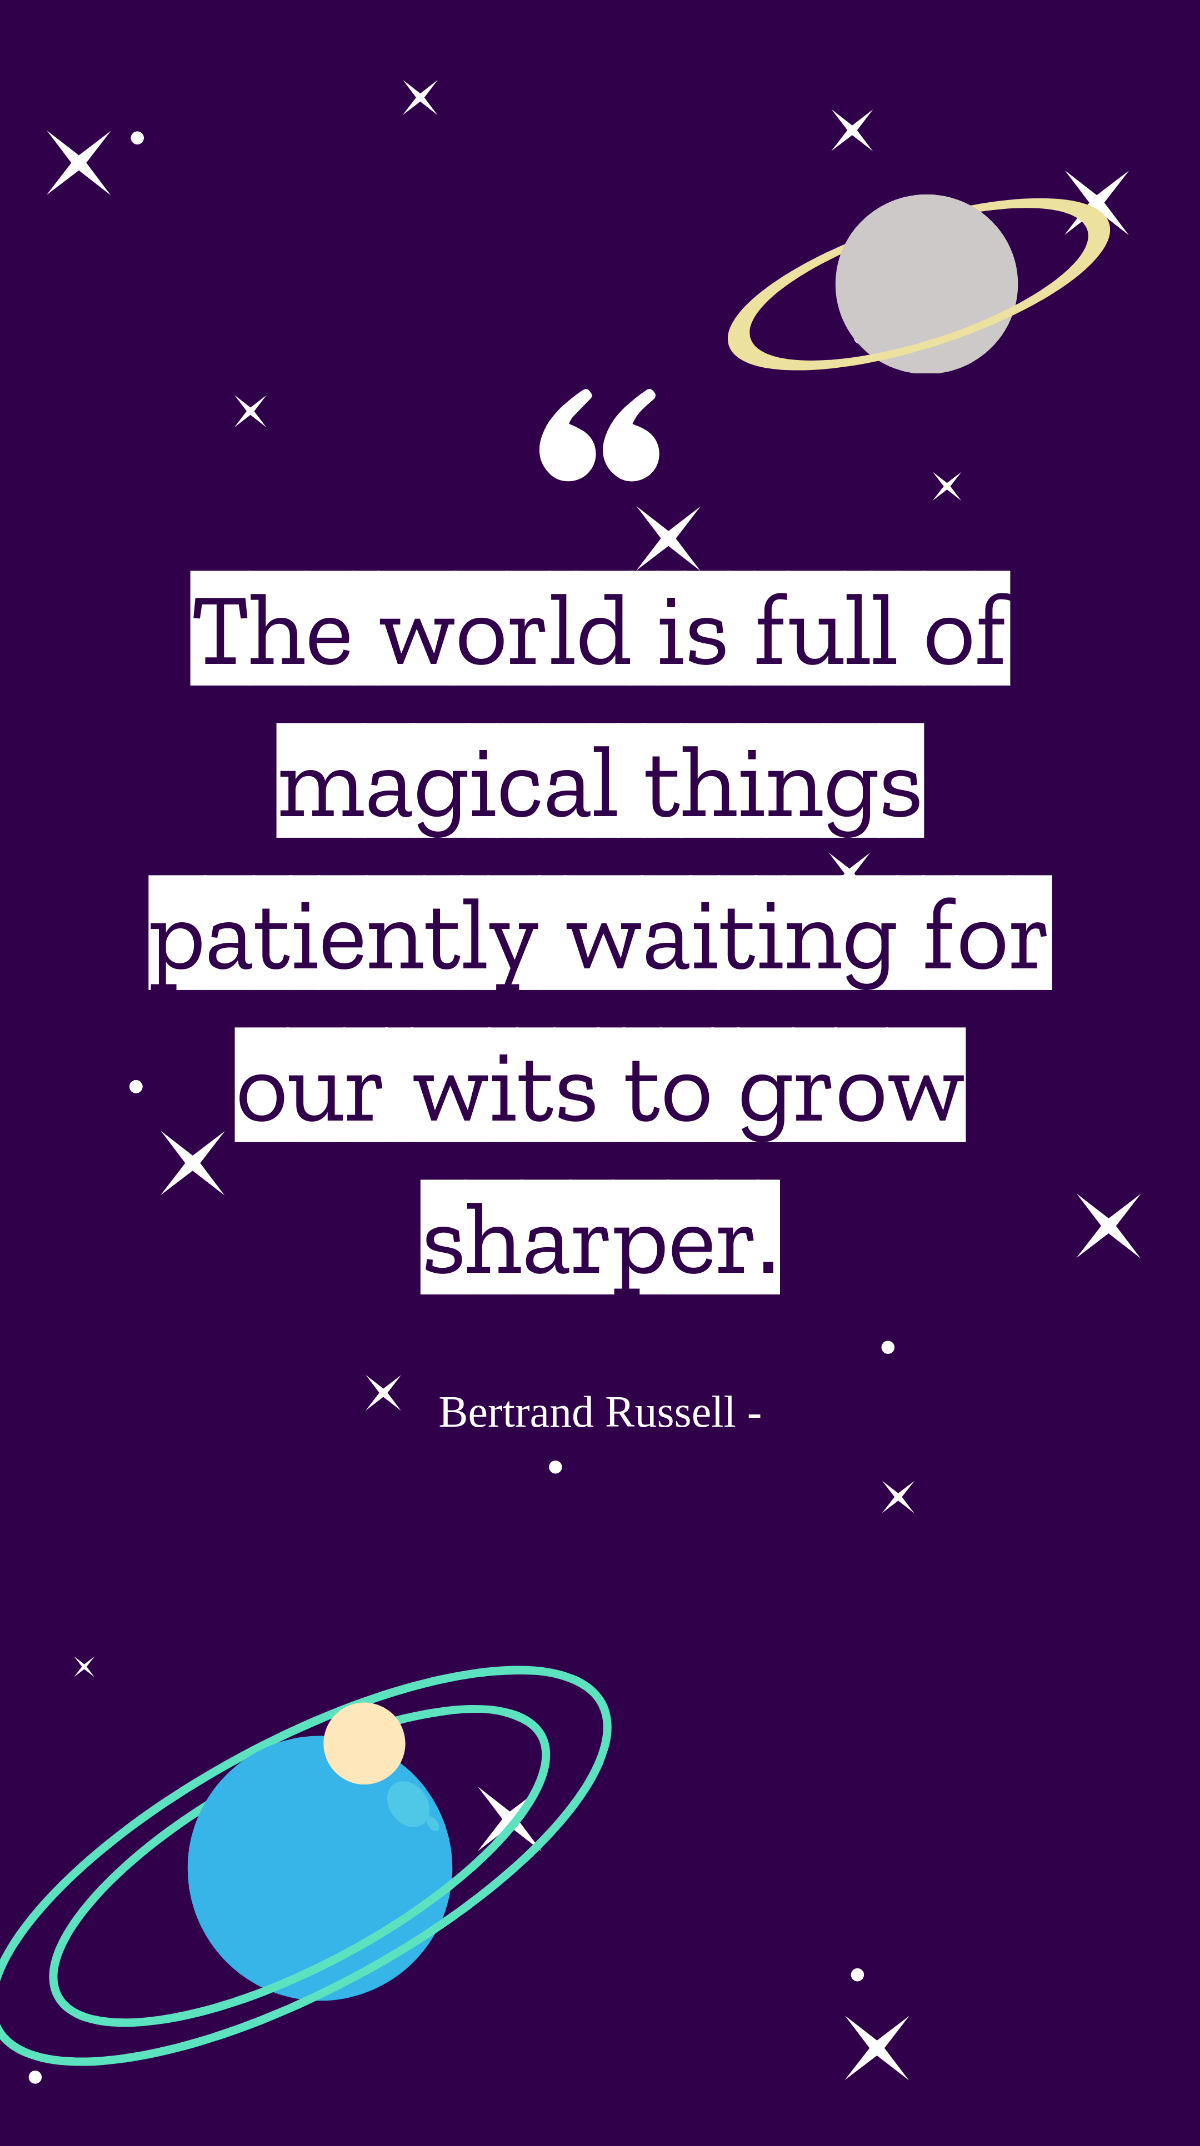 Bertrand Russell - The world is full of magical things patiently waiting for our wits to grow sharper. Template